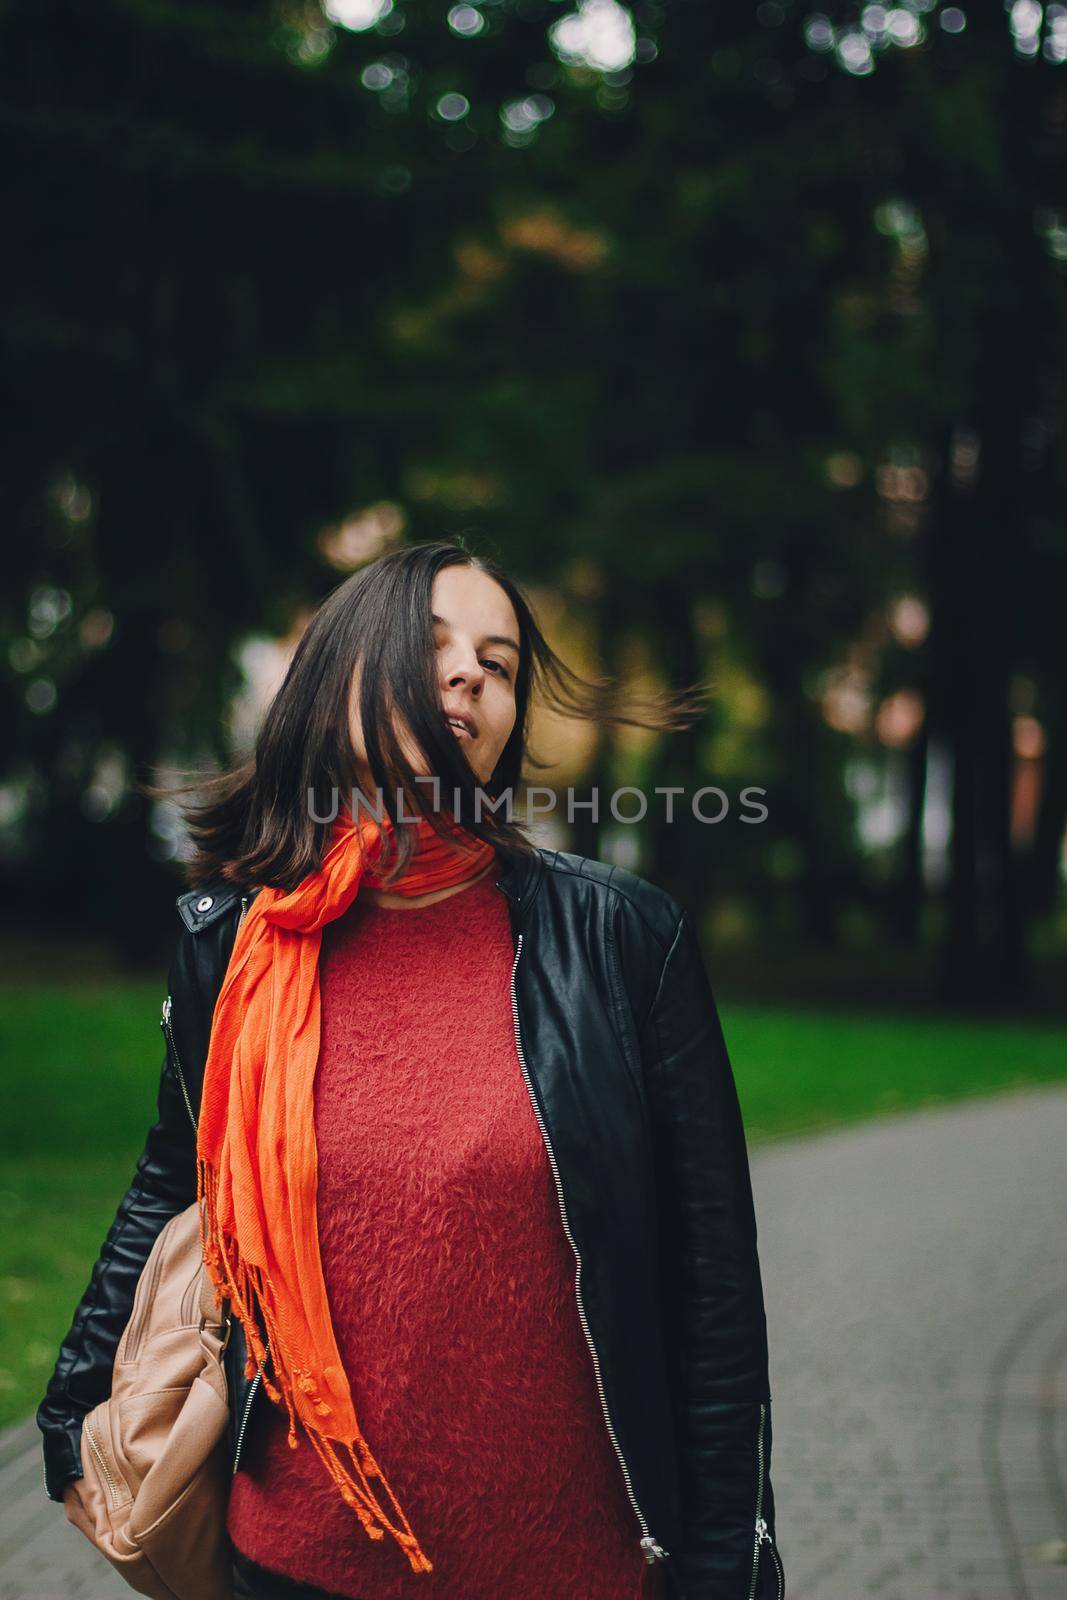 Portrait of a happy woman playing with bright orange scarf in the park